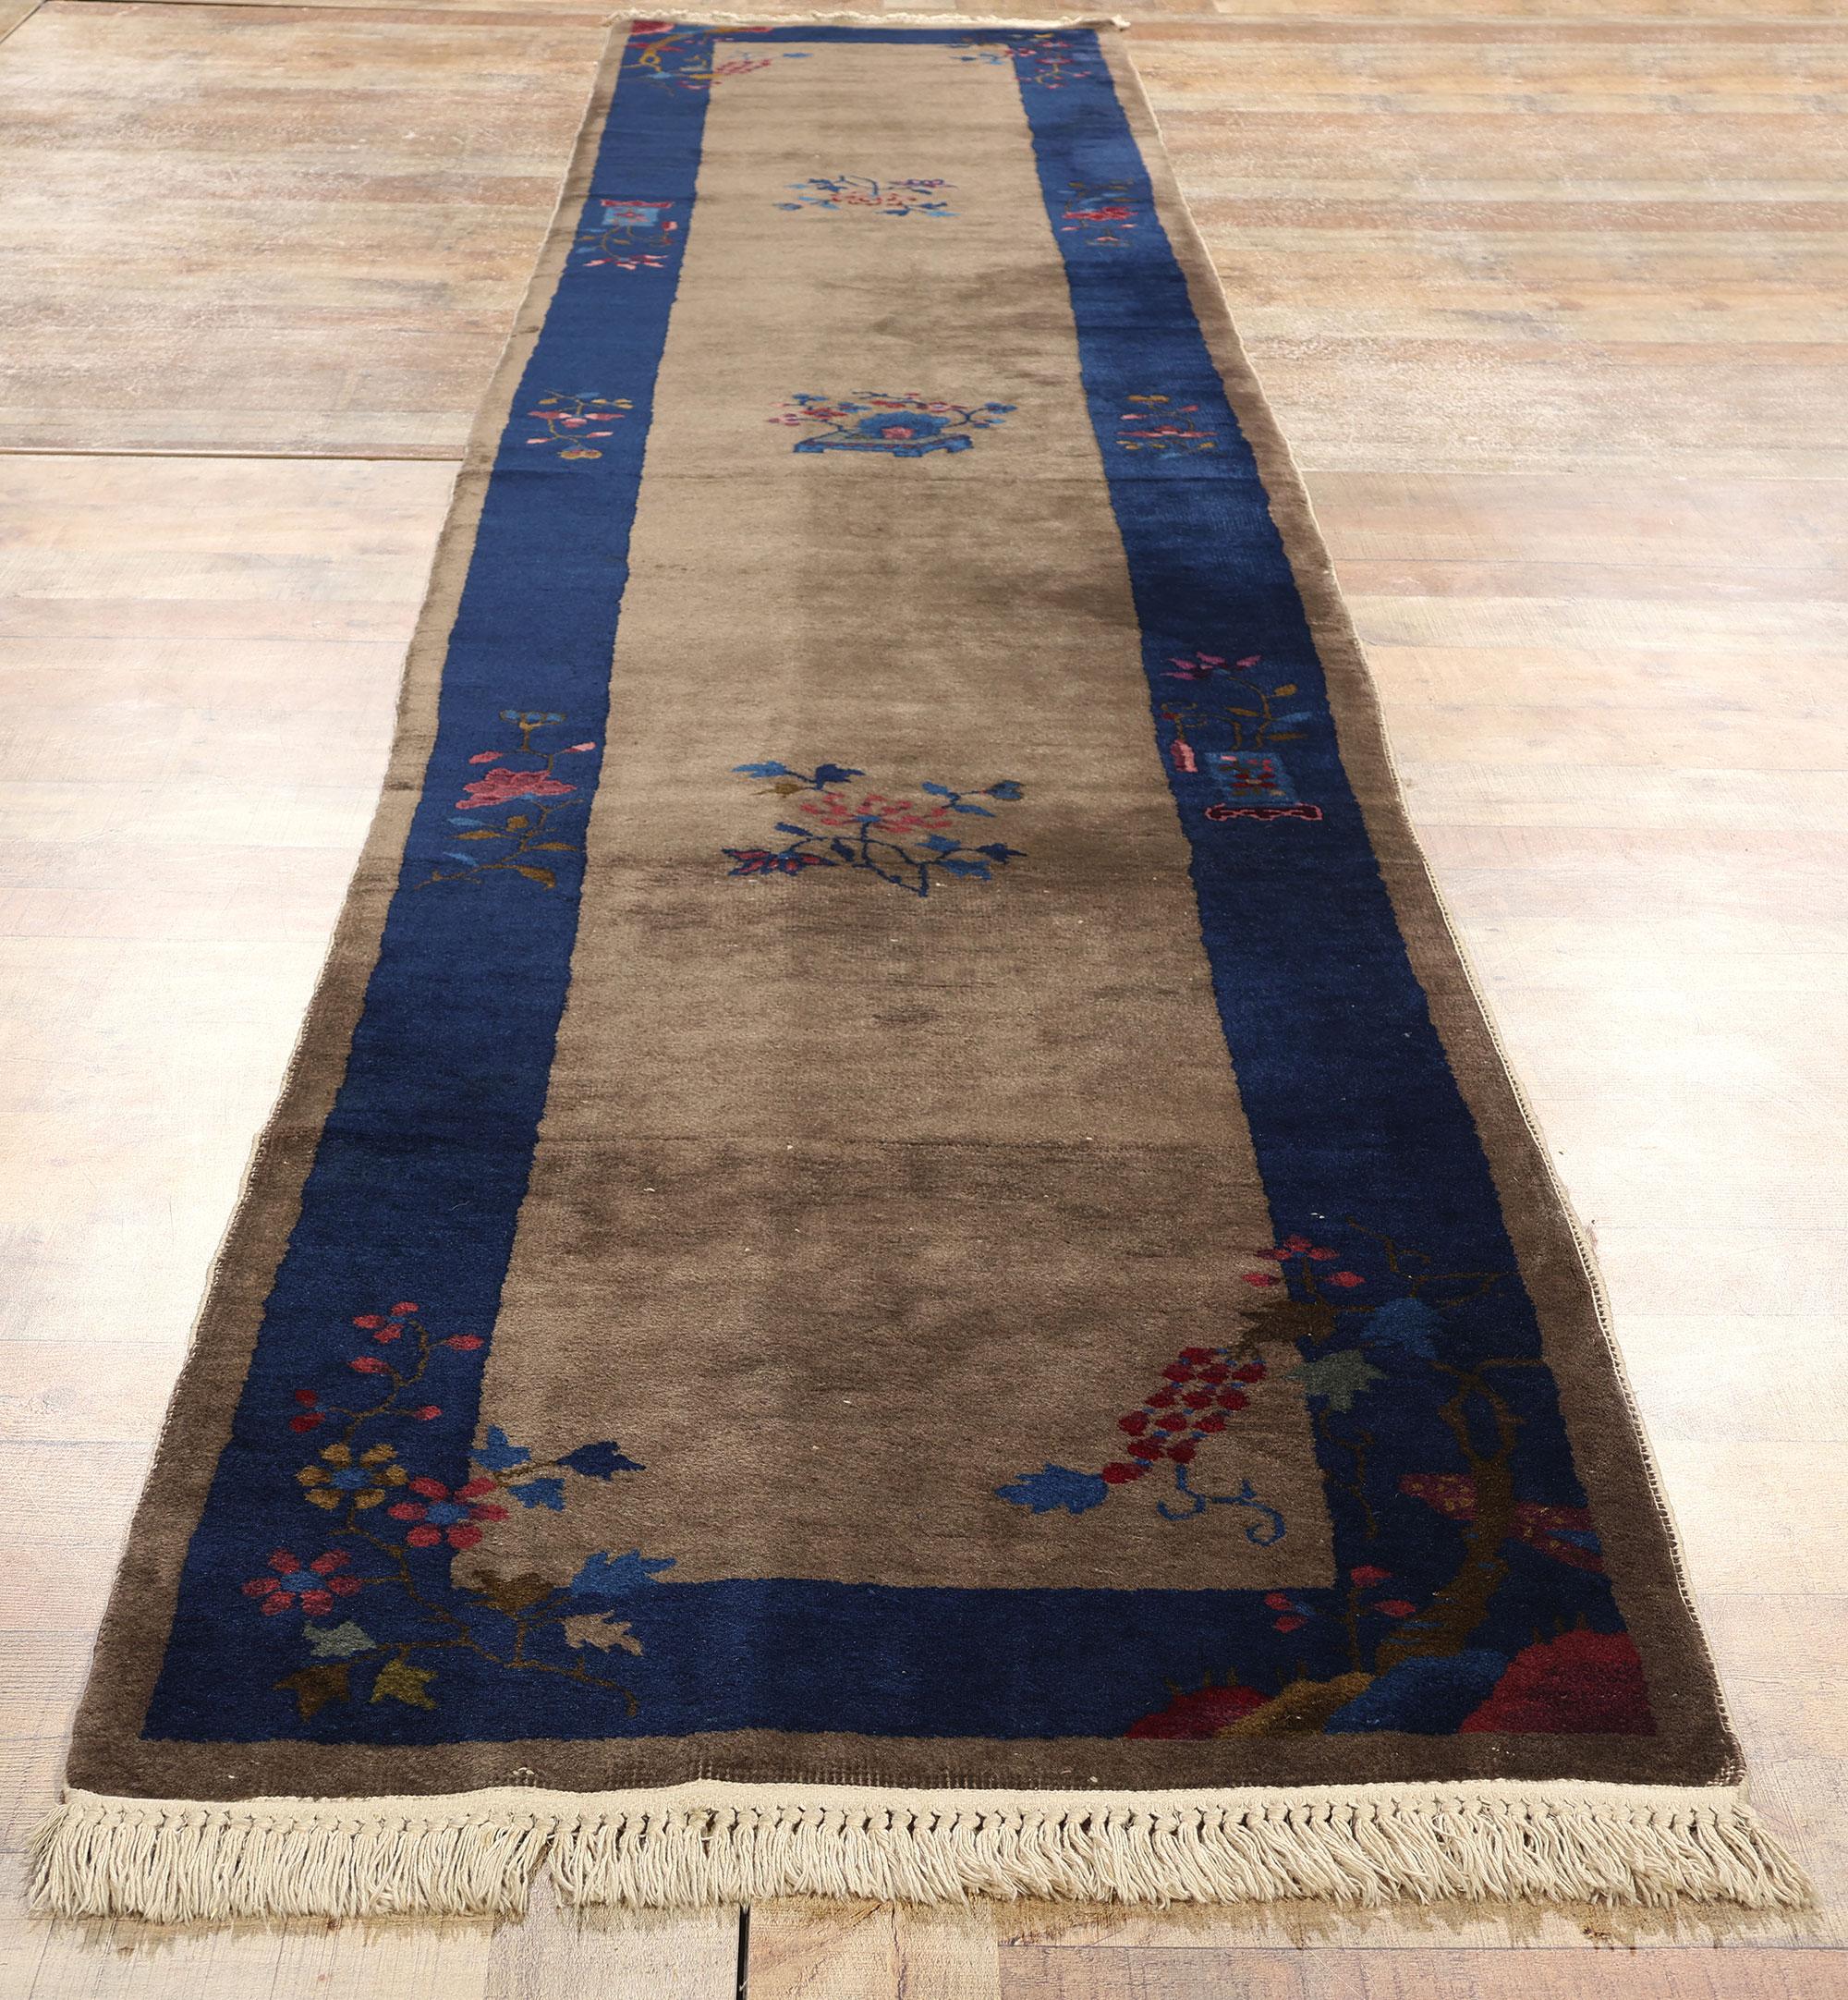 Antique Brown and Blue Chinese Peking Rug Carpet Runner For Sale 1